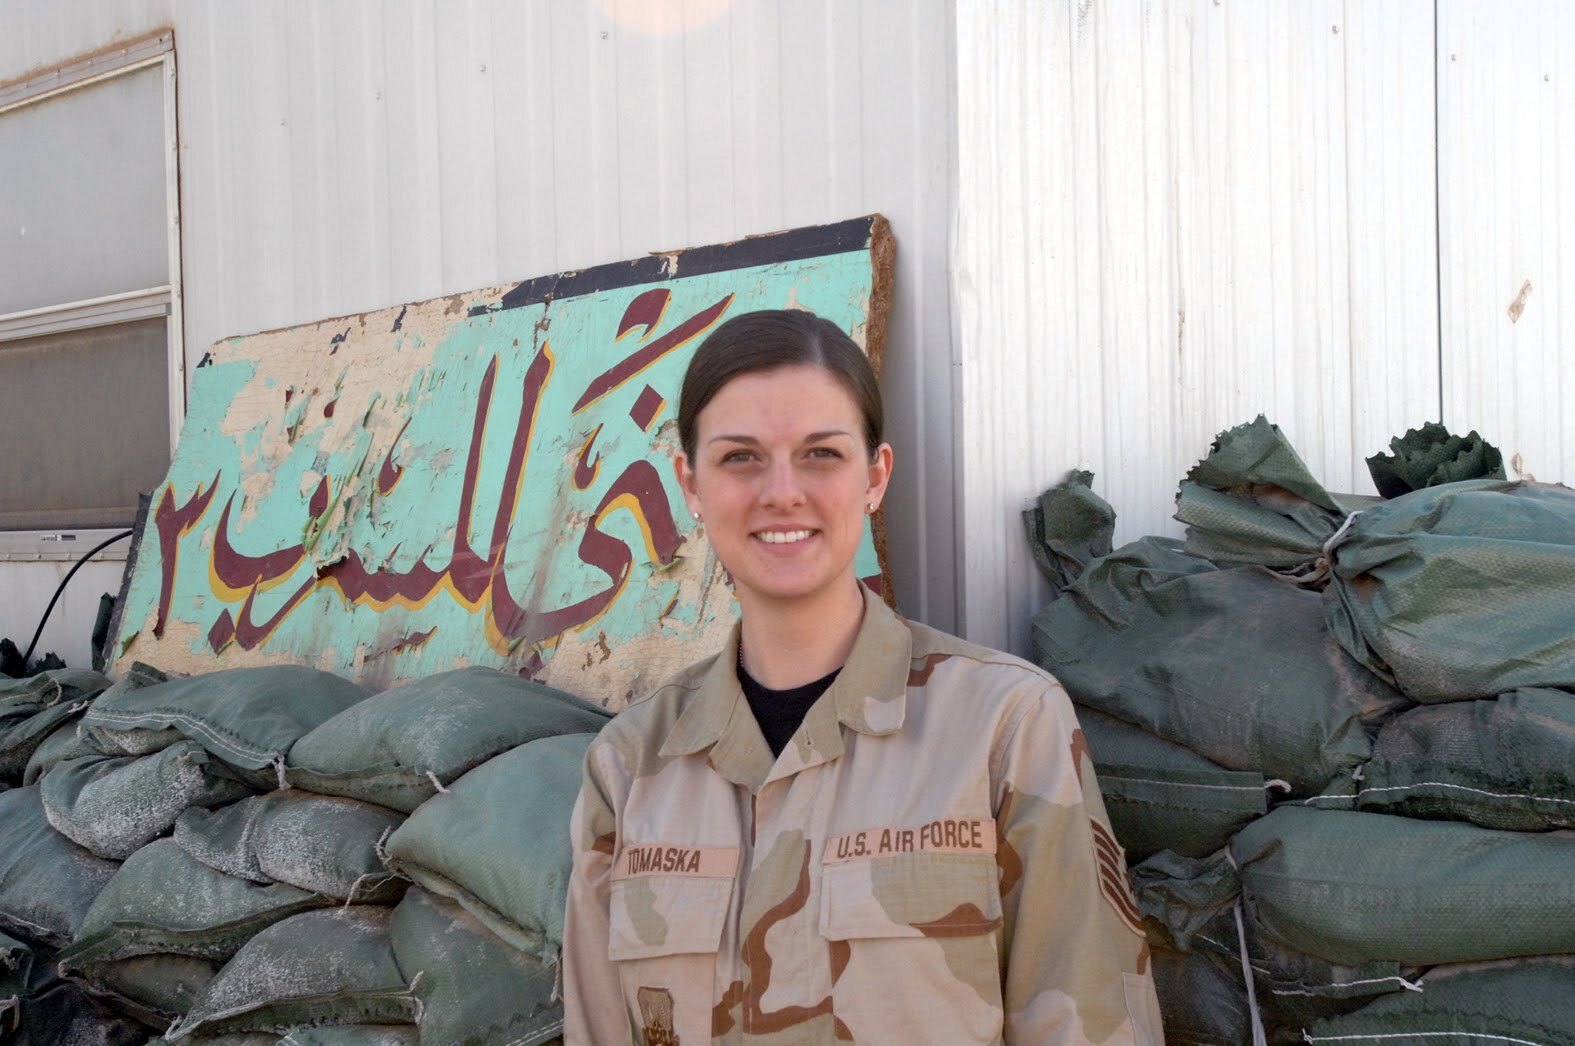 woman in a US Air Force uniform stands in front of sand bags and a sign in Arabic